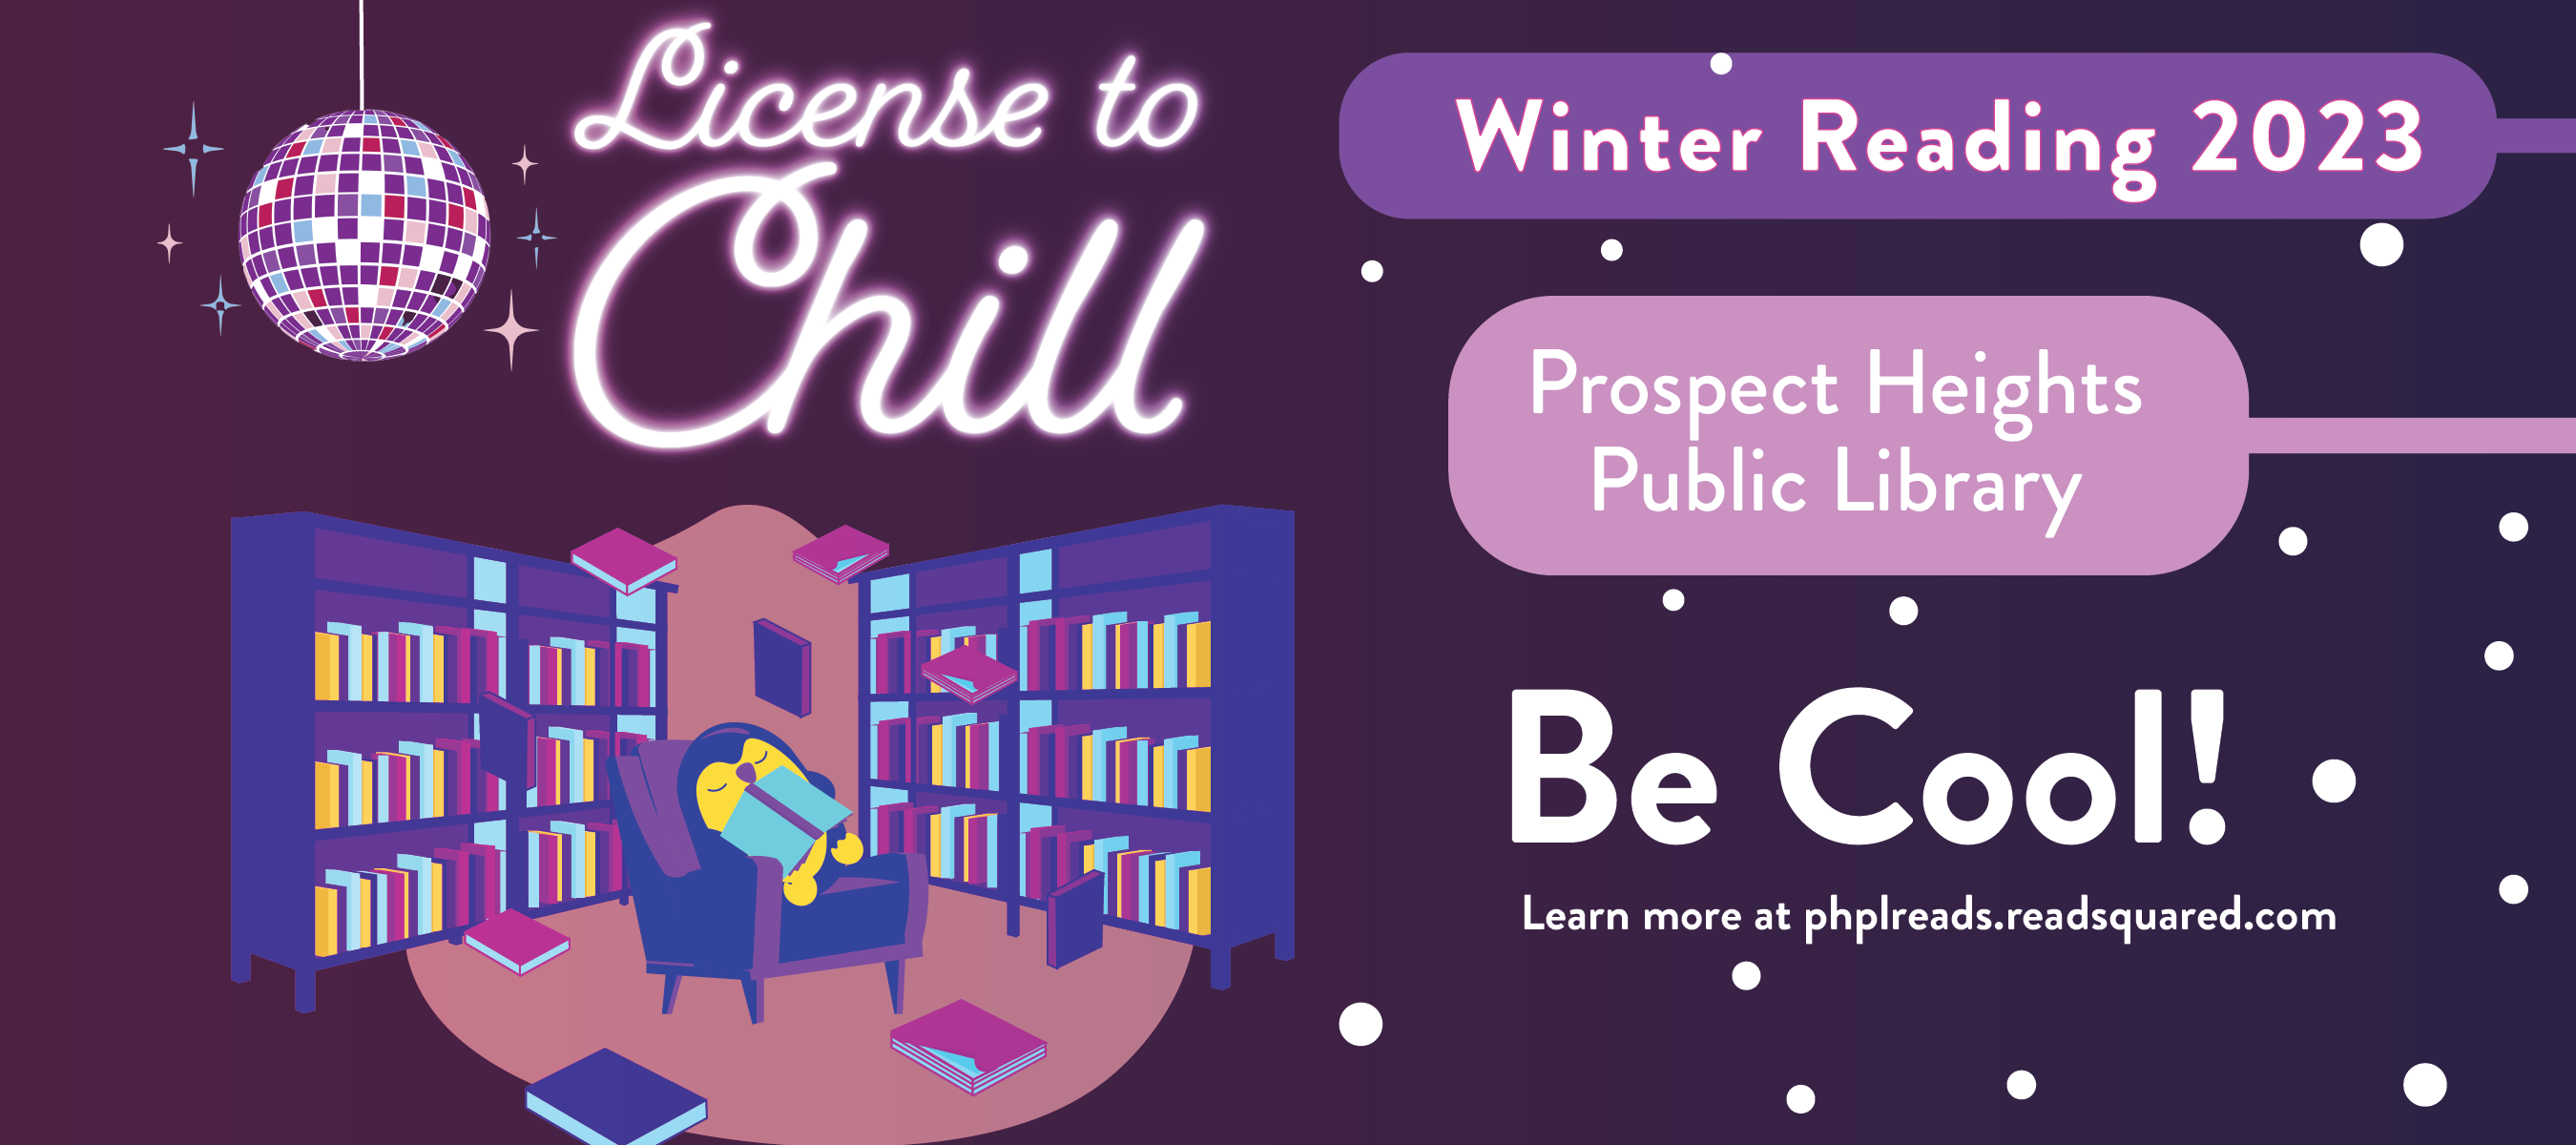 Winter Reading, Prizes, Games, Raffle, Prospect Heights Public Library